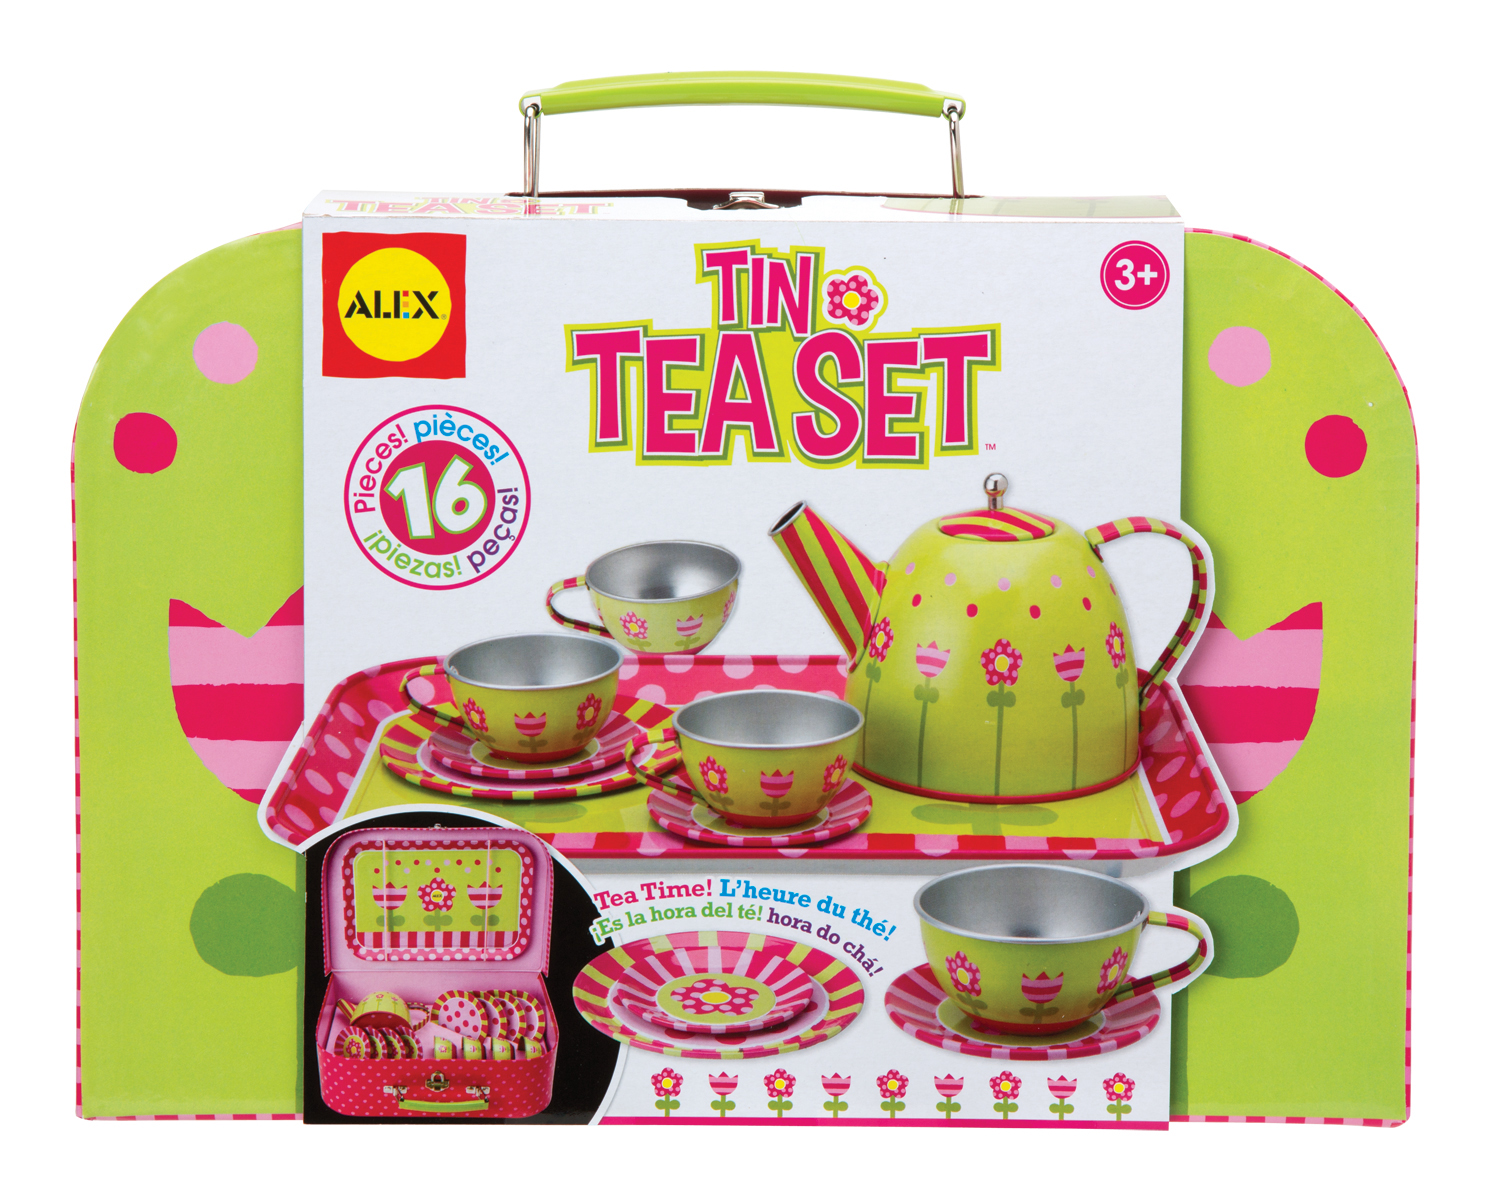 Pretend Tea Set Kids Metal Tea Set for Role Play with 1 Portable Carrying Case- Birds and Flowers Print 27 Pack Tin Tea Set